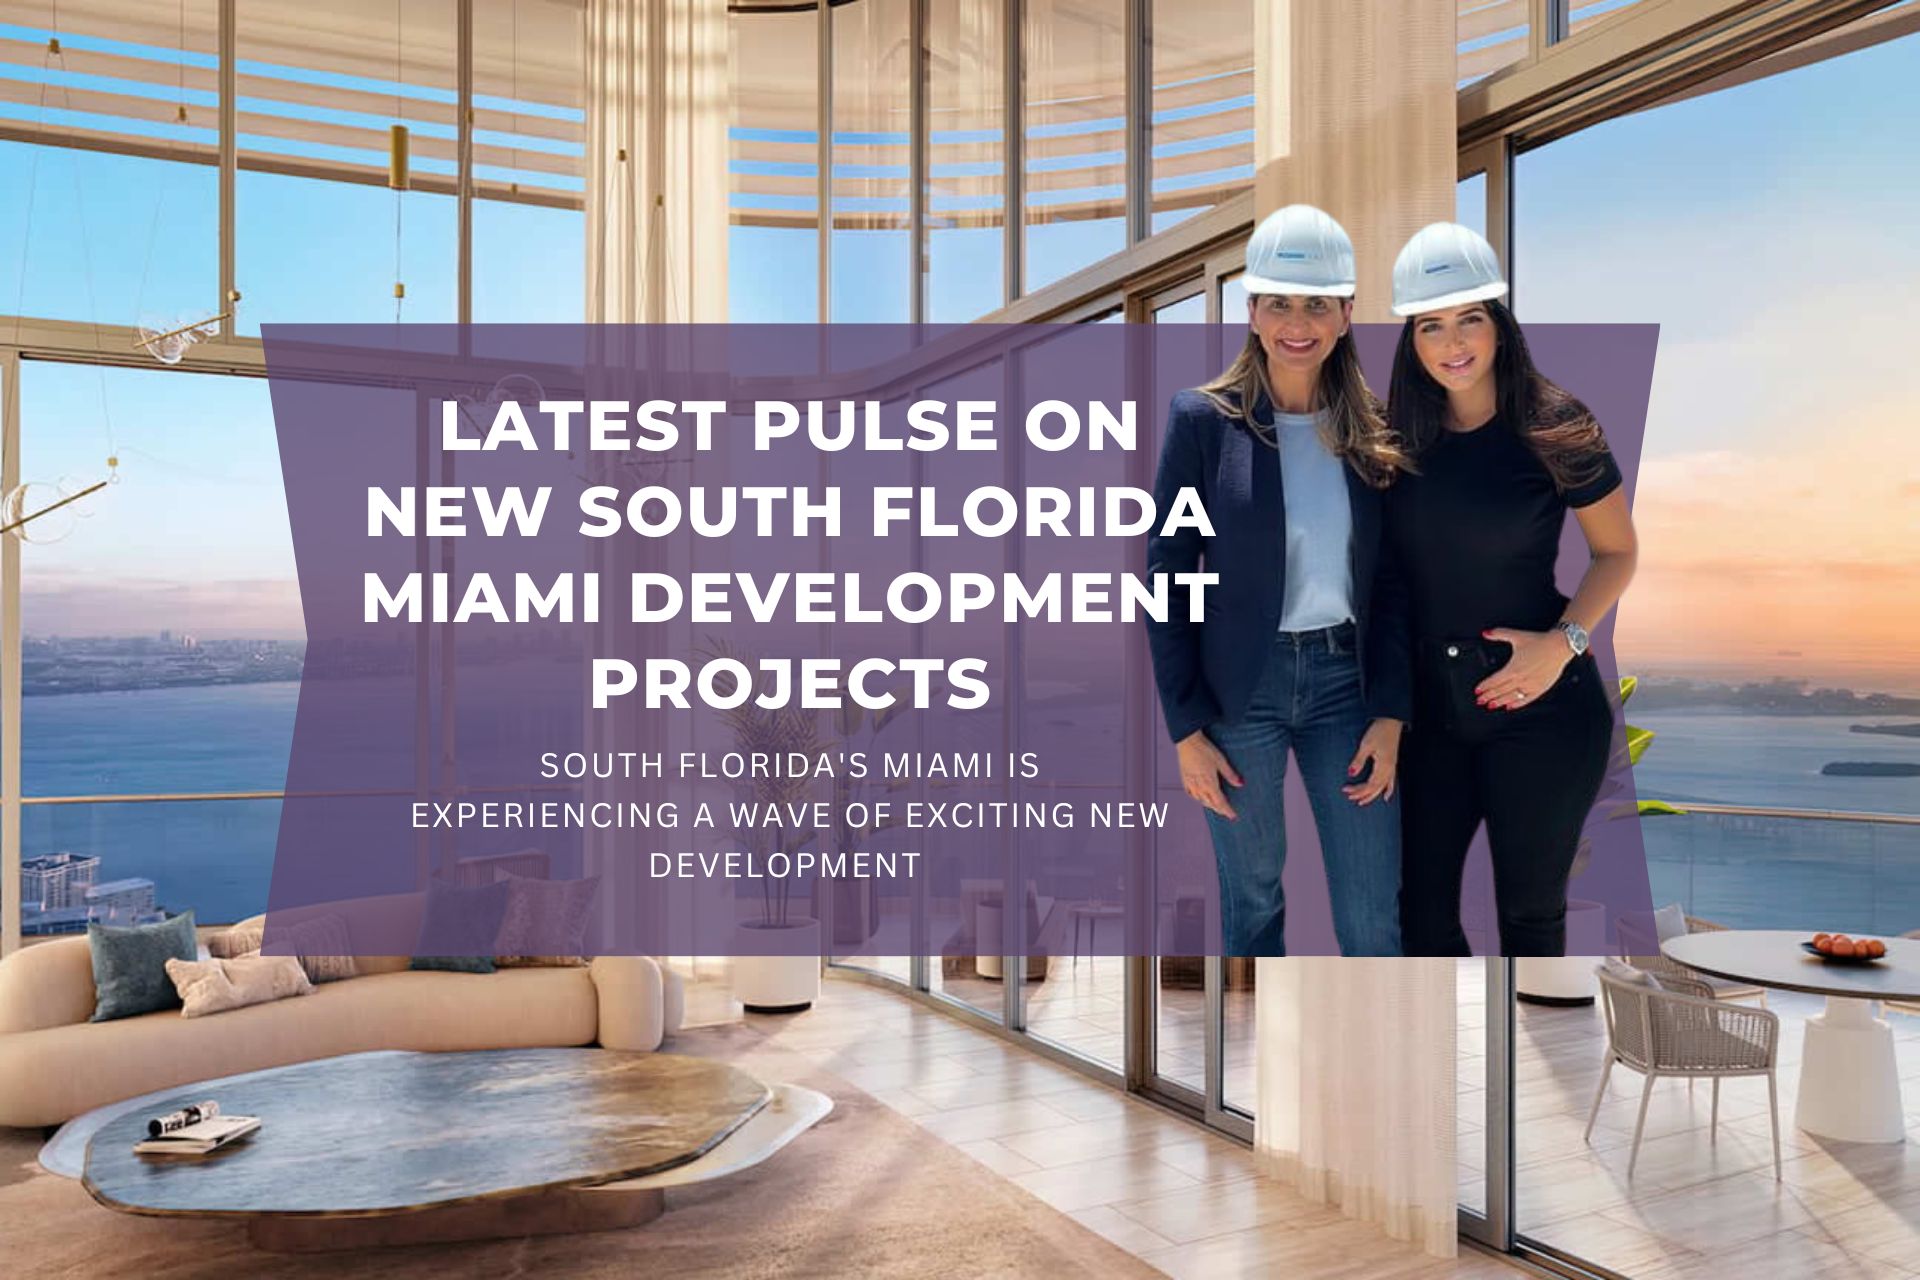 The Latest Pulse on New South Florida Miami Development Projects